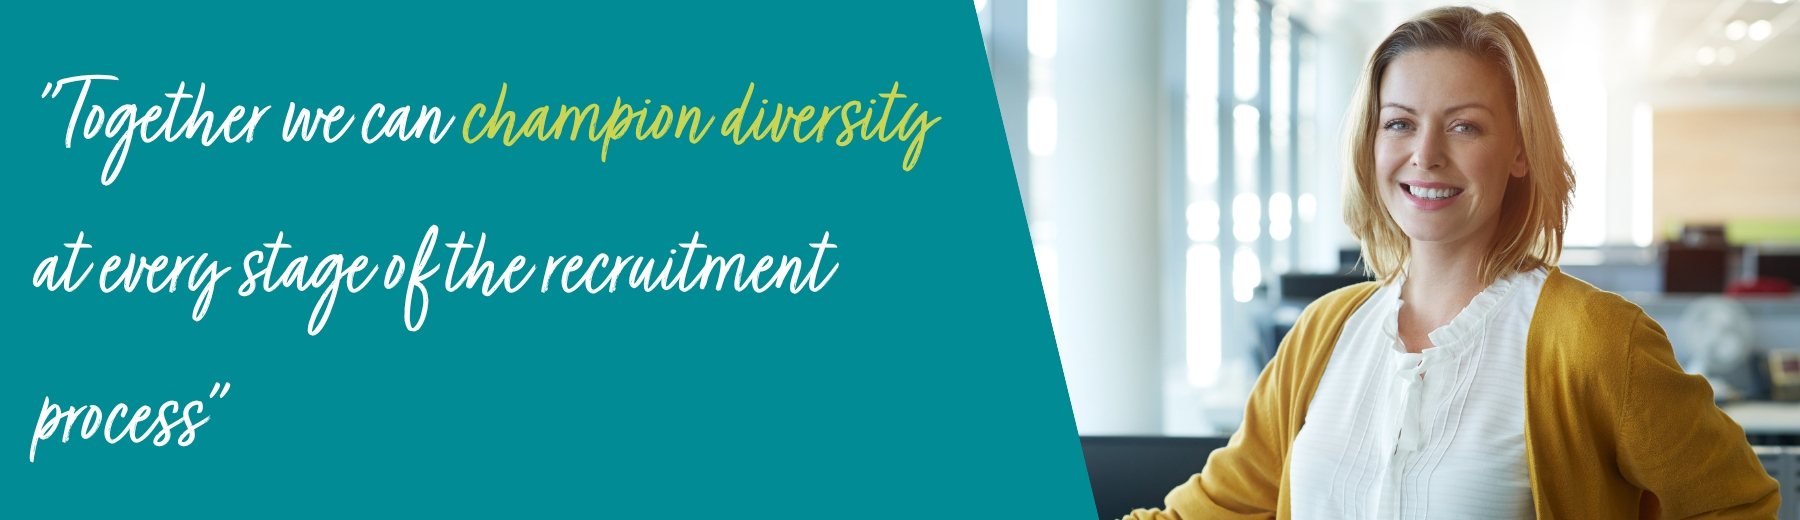 Together we can champion diversity at every stage of the recruitment process